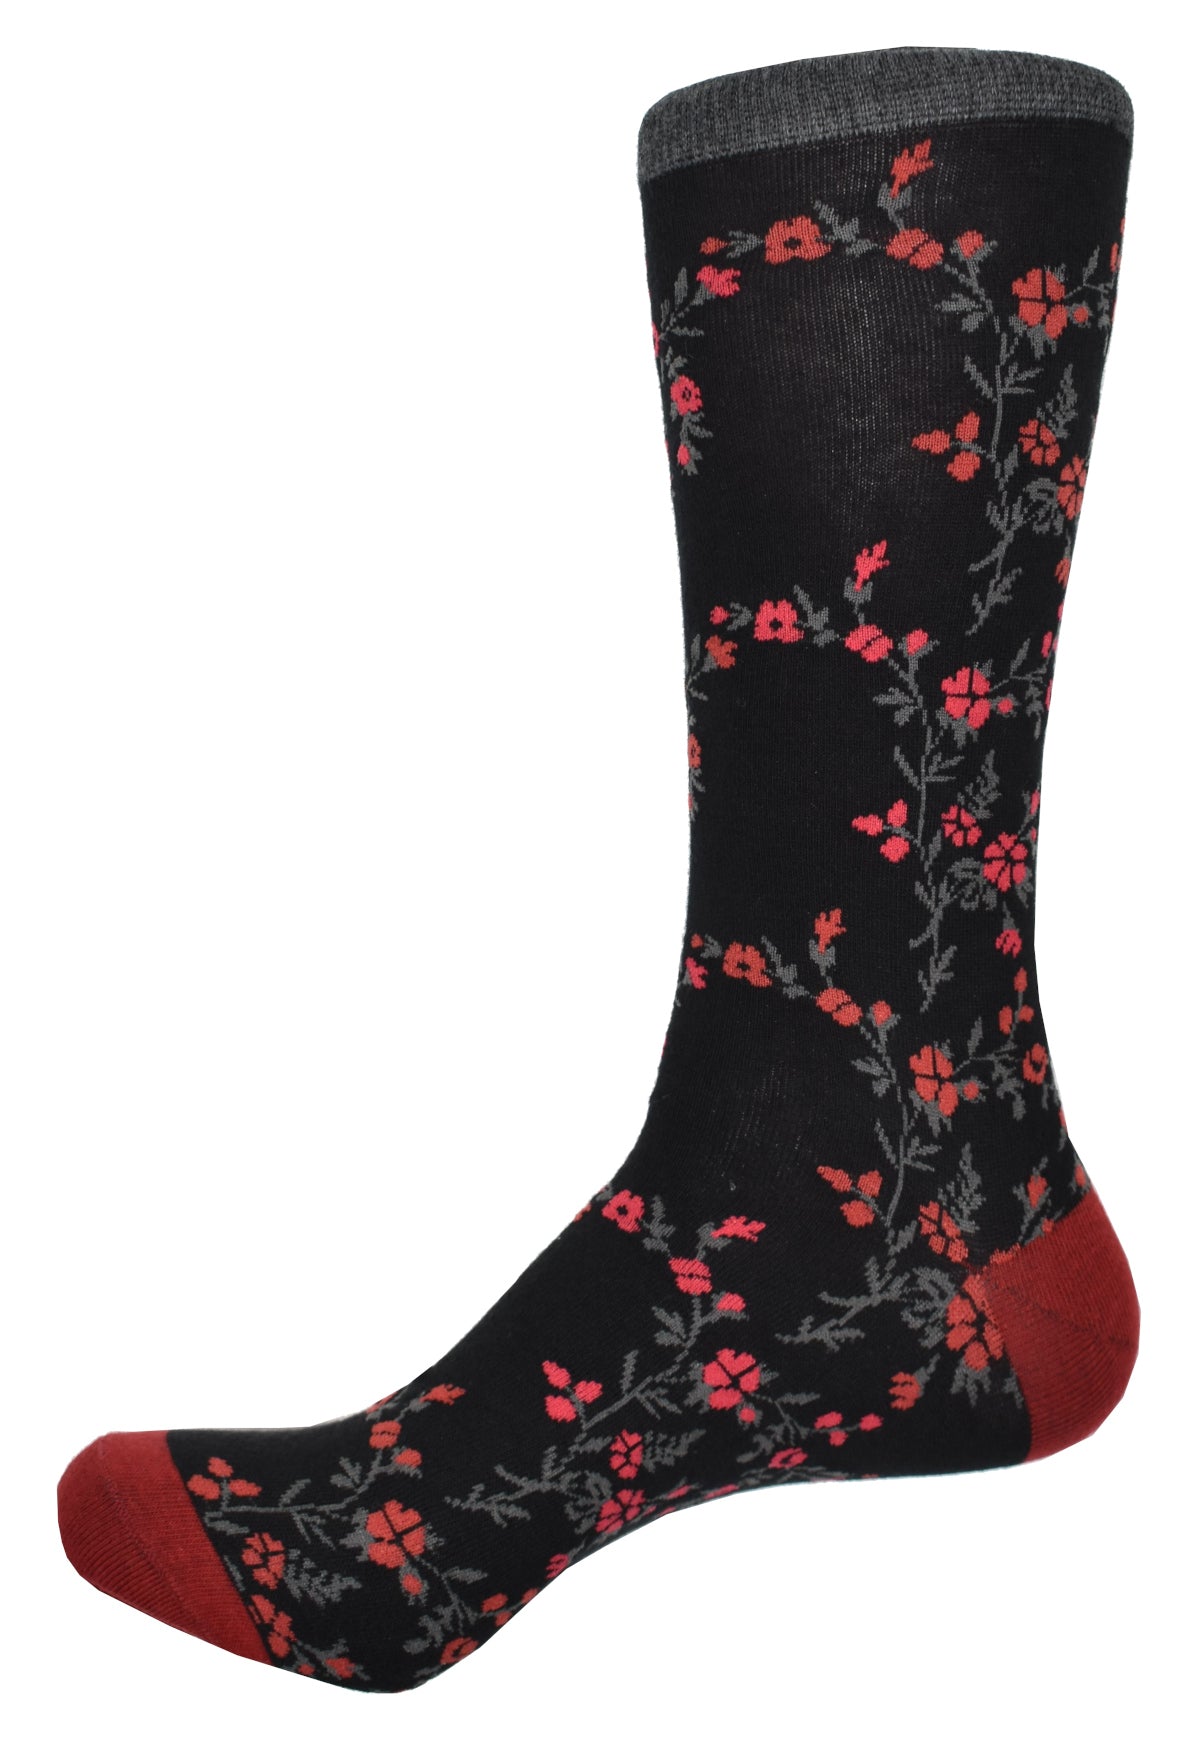 Brighten up your wardrobe with this ZJ8065 Floral Sock. Adorned with a traditional floral pattern, the rich mercerized cotton fabric and sharp black with red color is sure to bring a trendy touch to your ensemble. Marcello Socks.